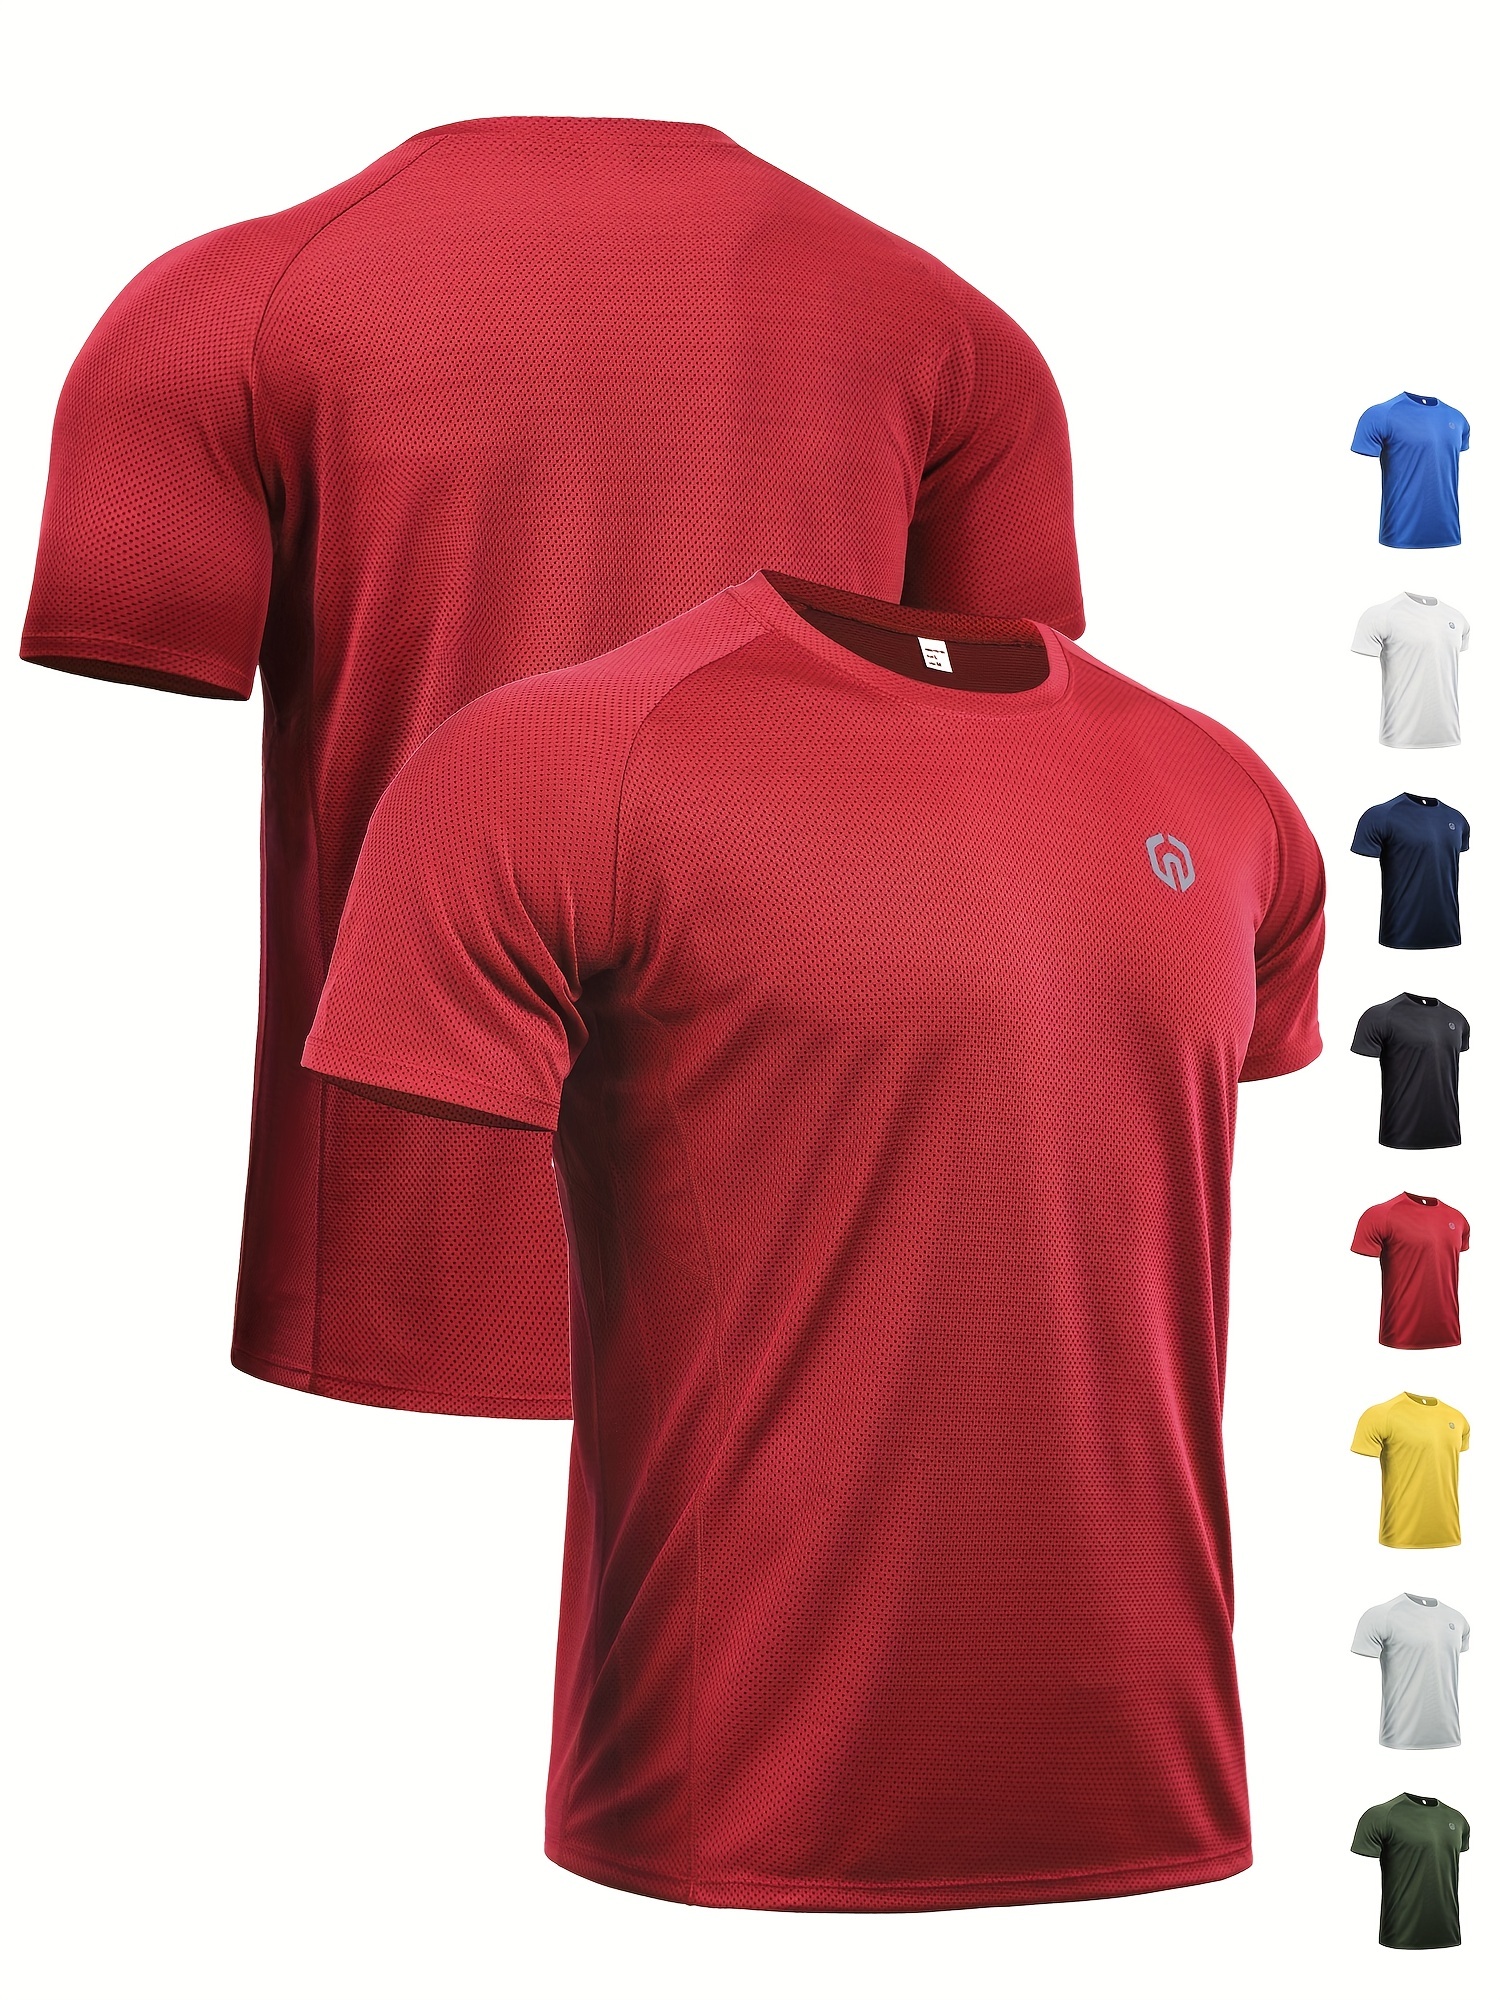  Rainbow Shirt/Workout Shirts for Men, Going Out Casual Business  Tee Shirts Round Neck Tees Shirt Men's Short Sleeve Tees Shirts,Summer  Shirts : Sports & Outdoors